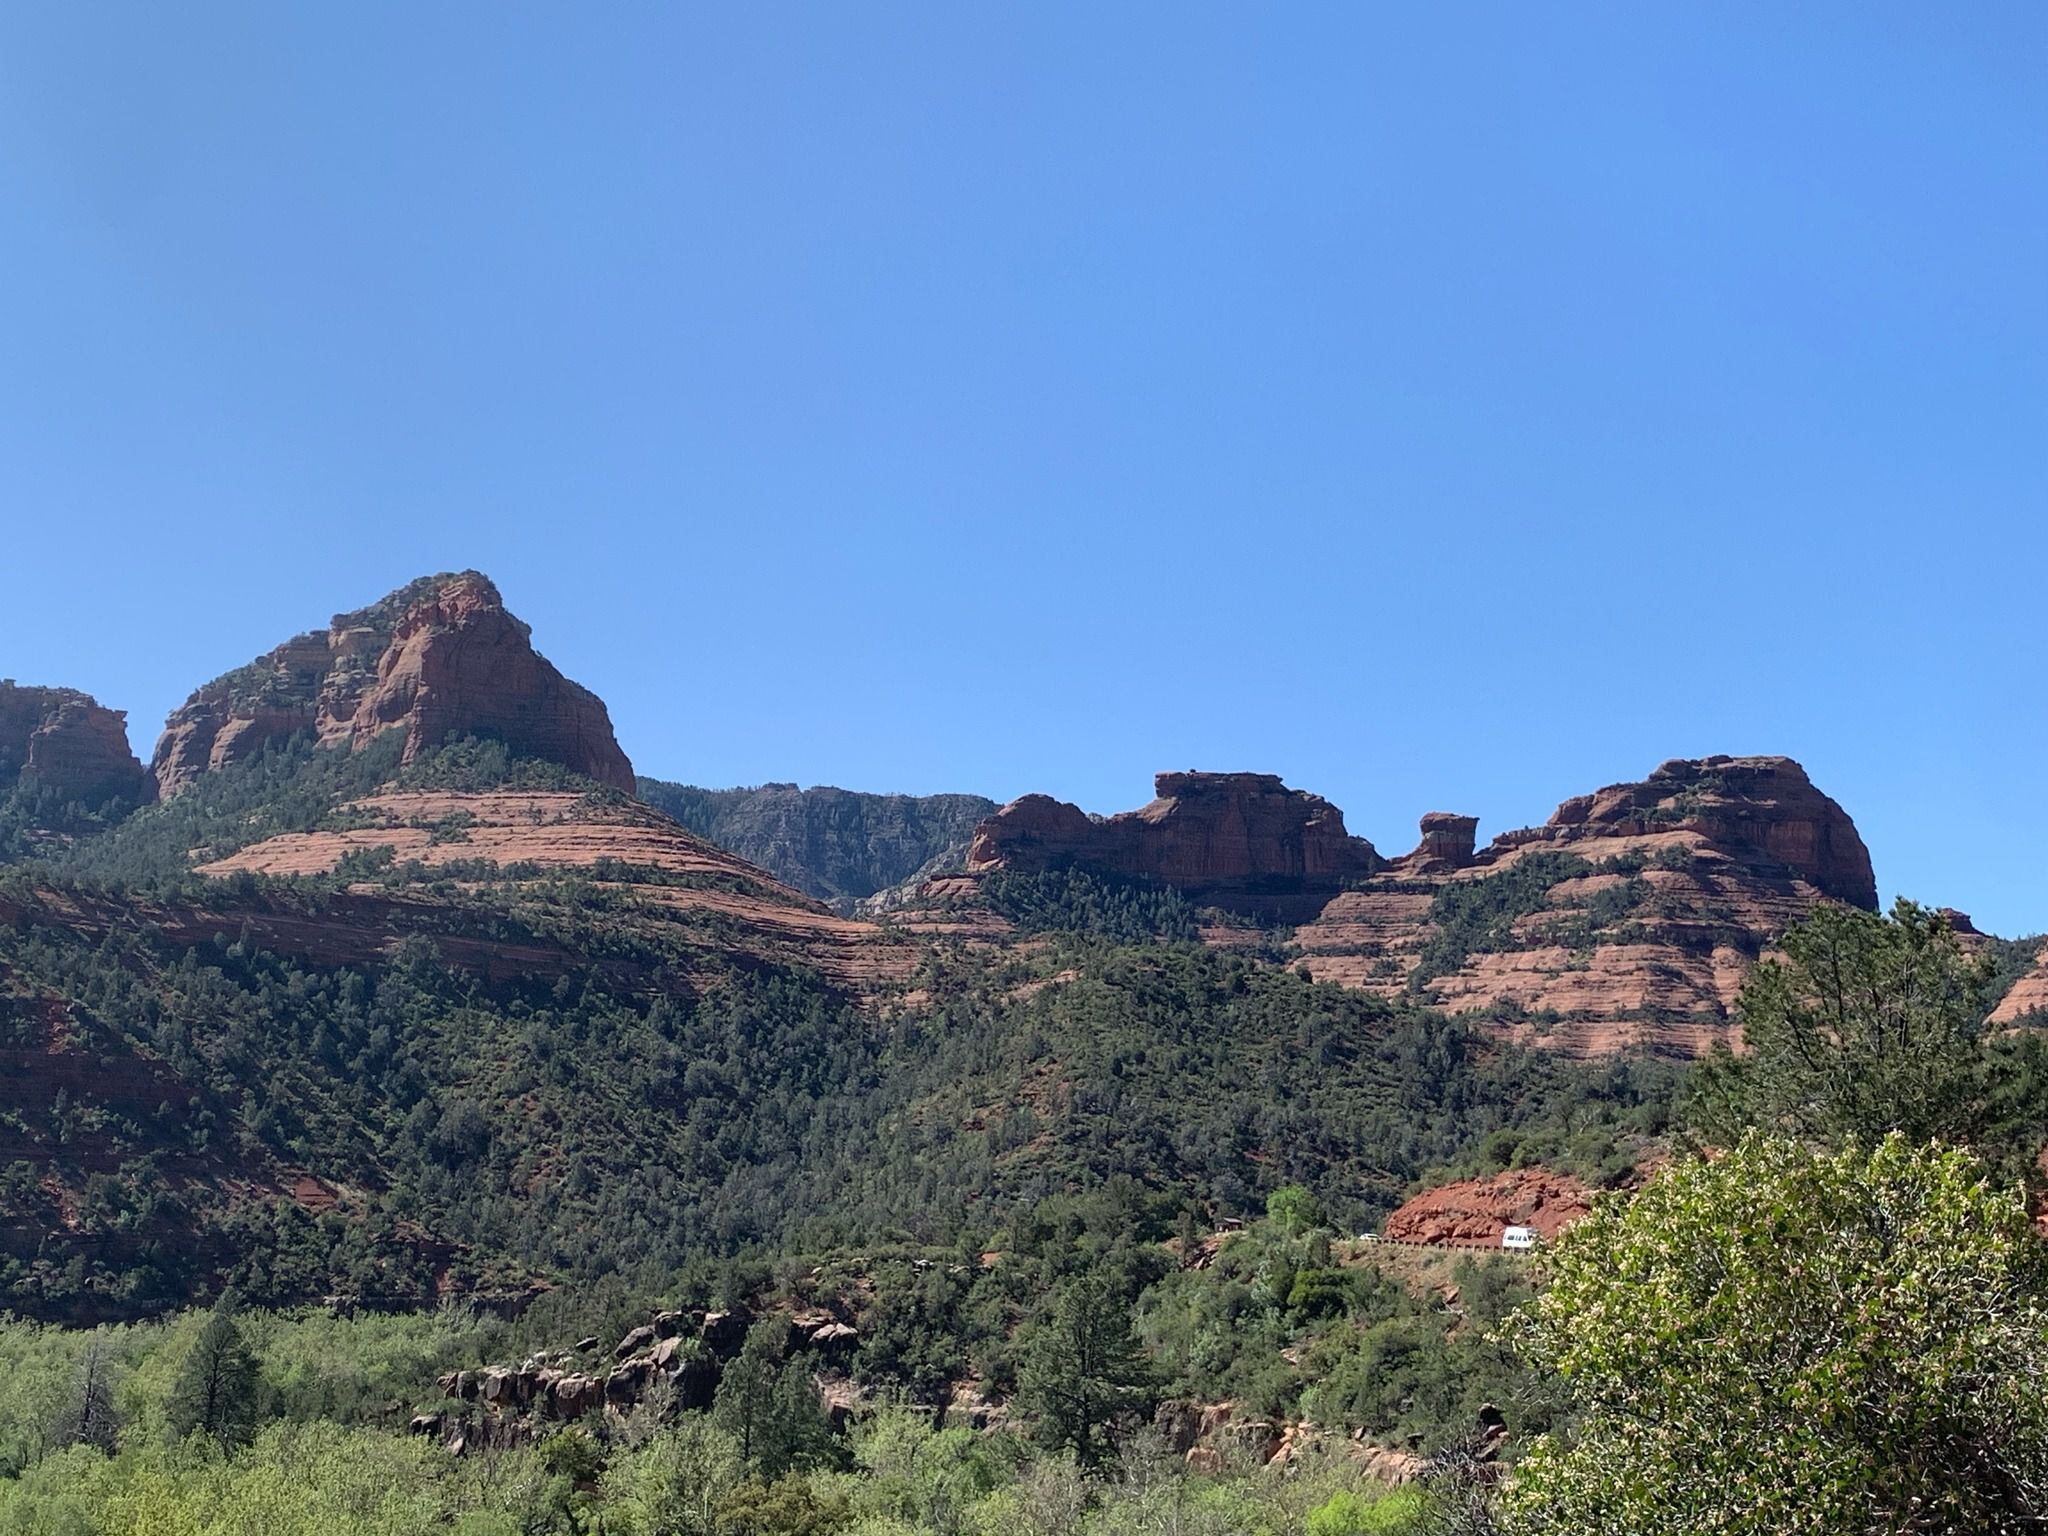 More views of the jaw-dropping topography of Sedona, AZ